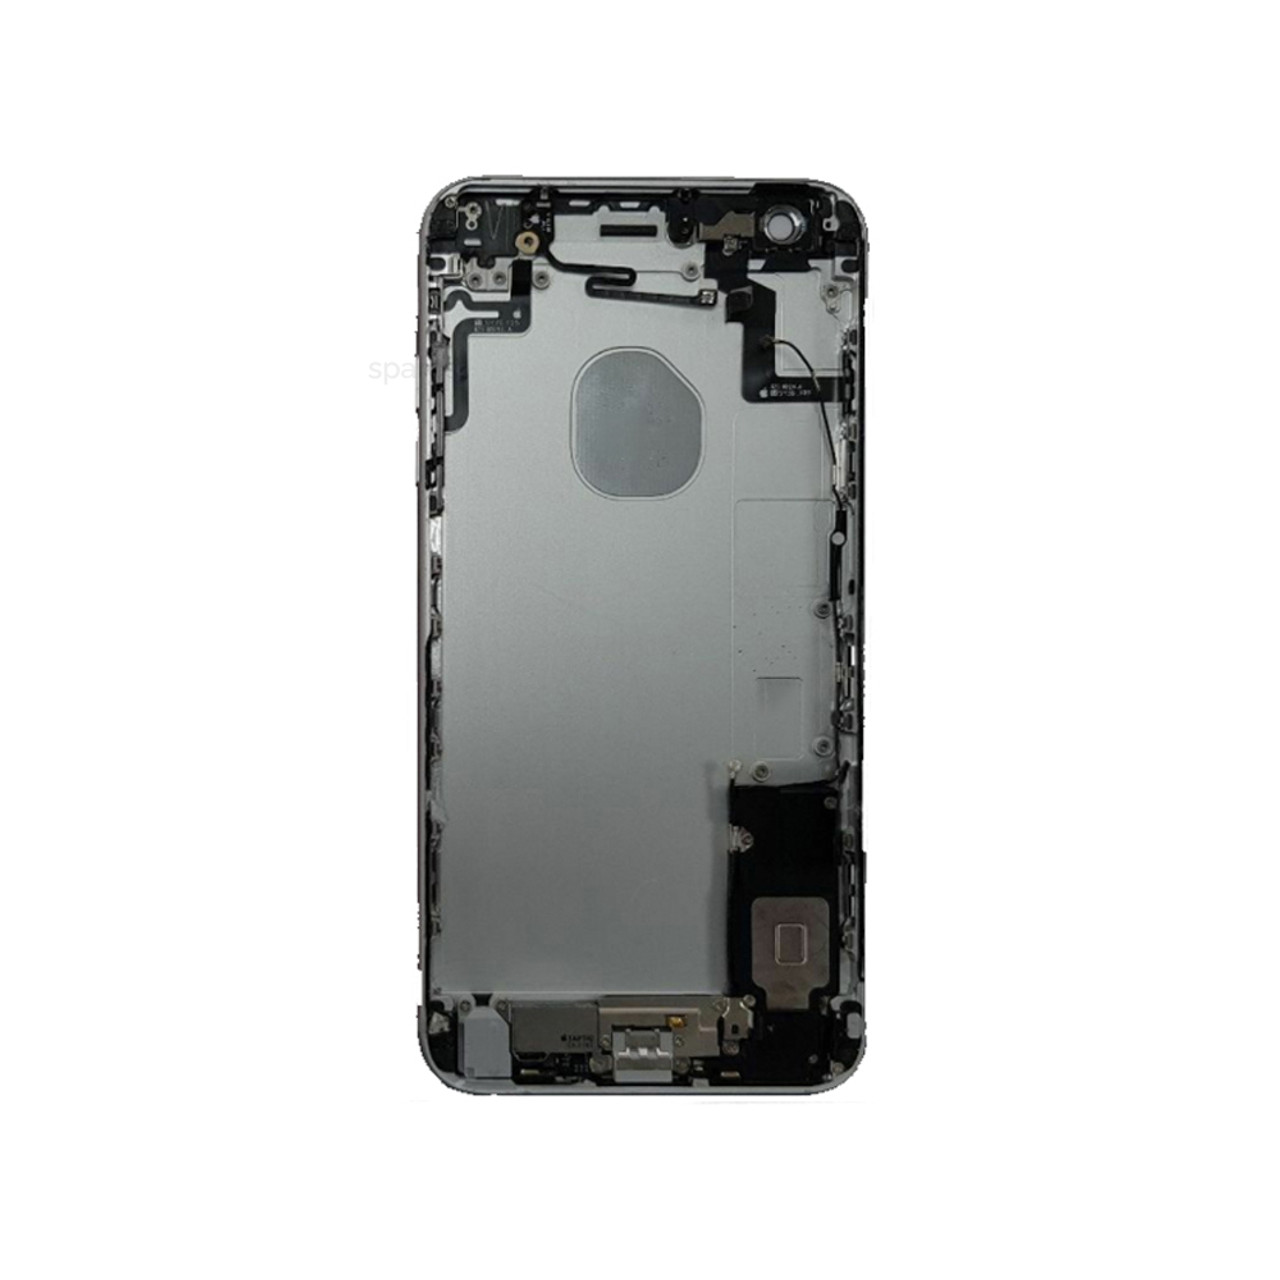 iPhone 6S Housing Chassis With Parts Silver Replacement